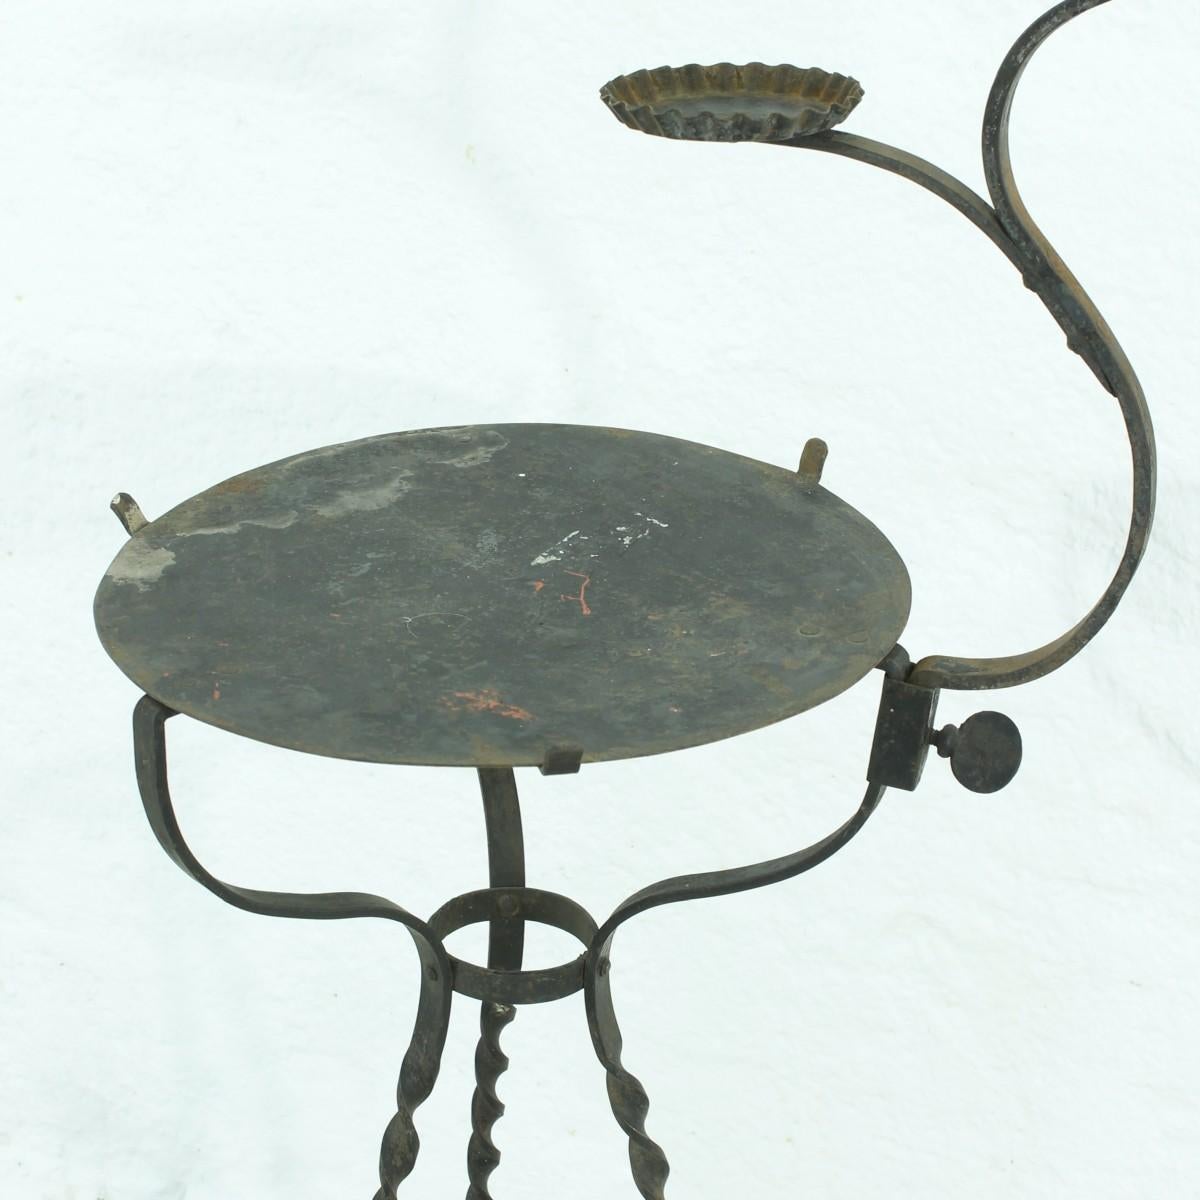 Vintage Flower or Plant Stand, 1940s (Metall) im Angebot